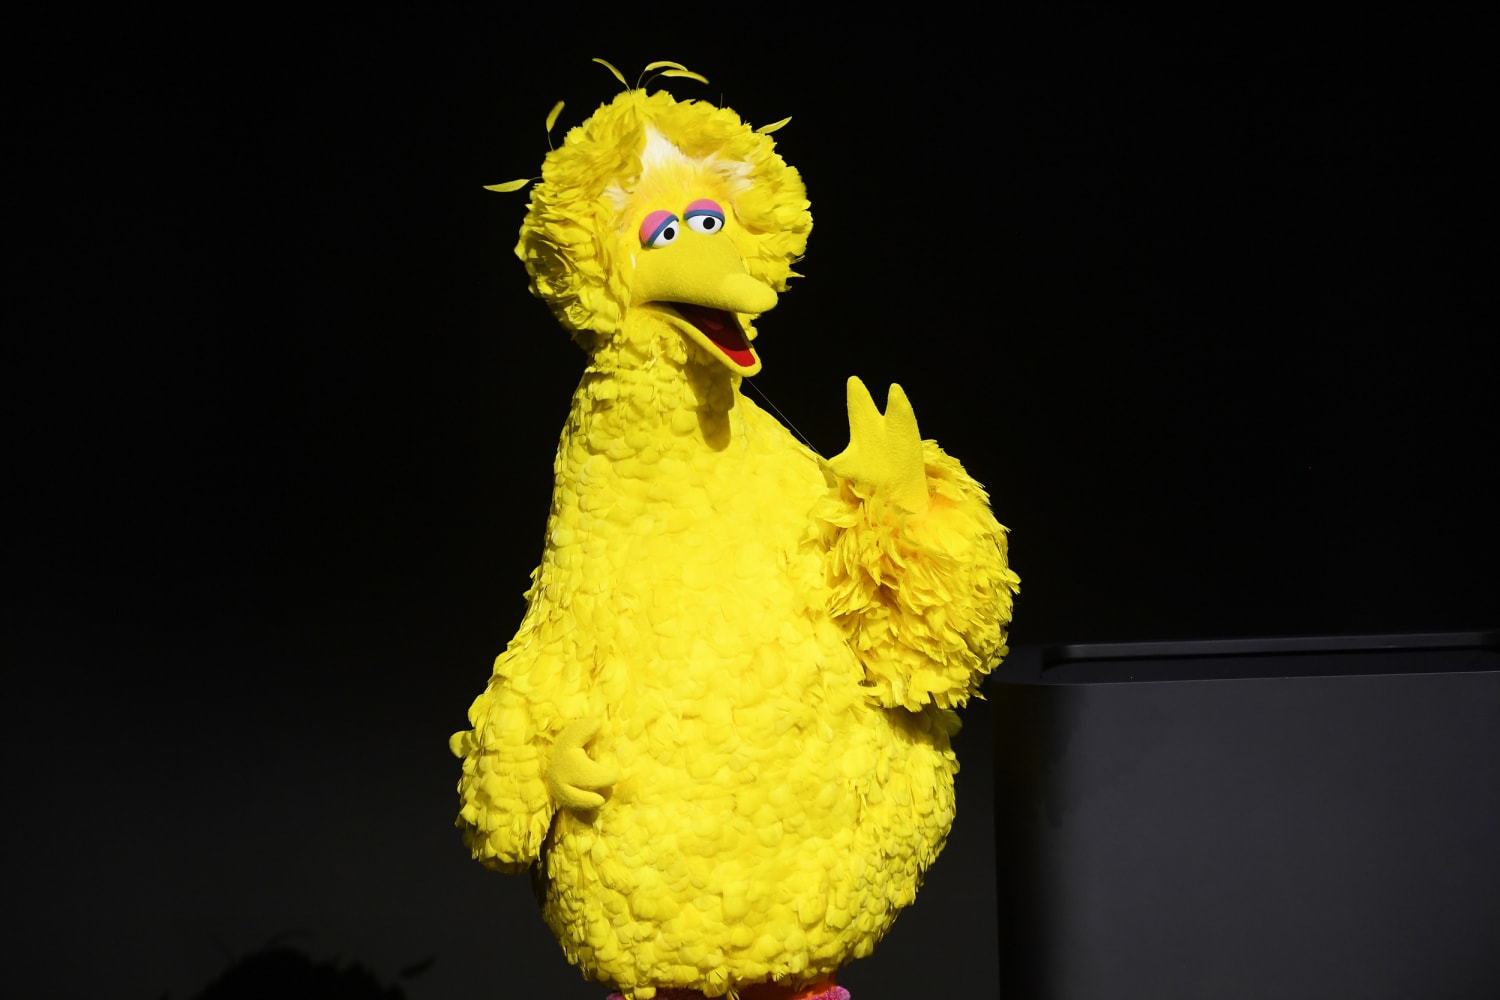 Big Bird vaccination announcement sparks backlash from conservatives, GOP